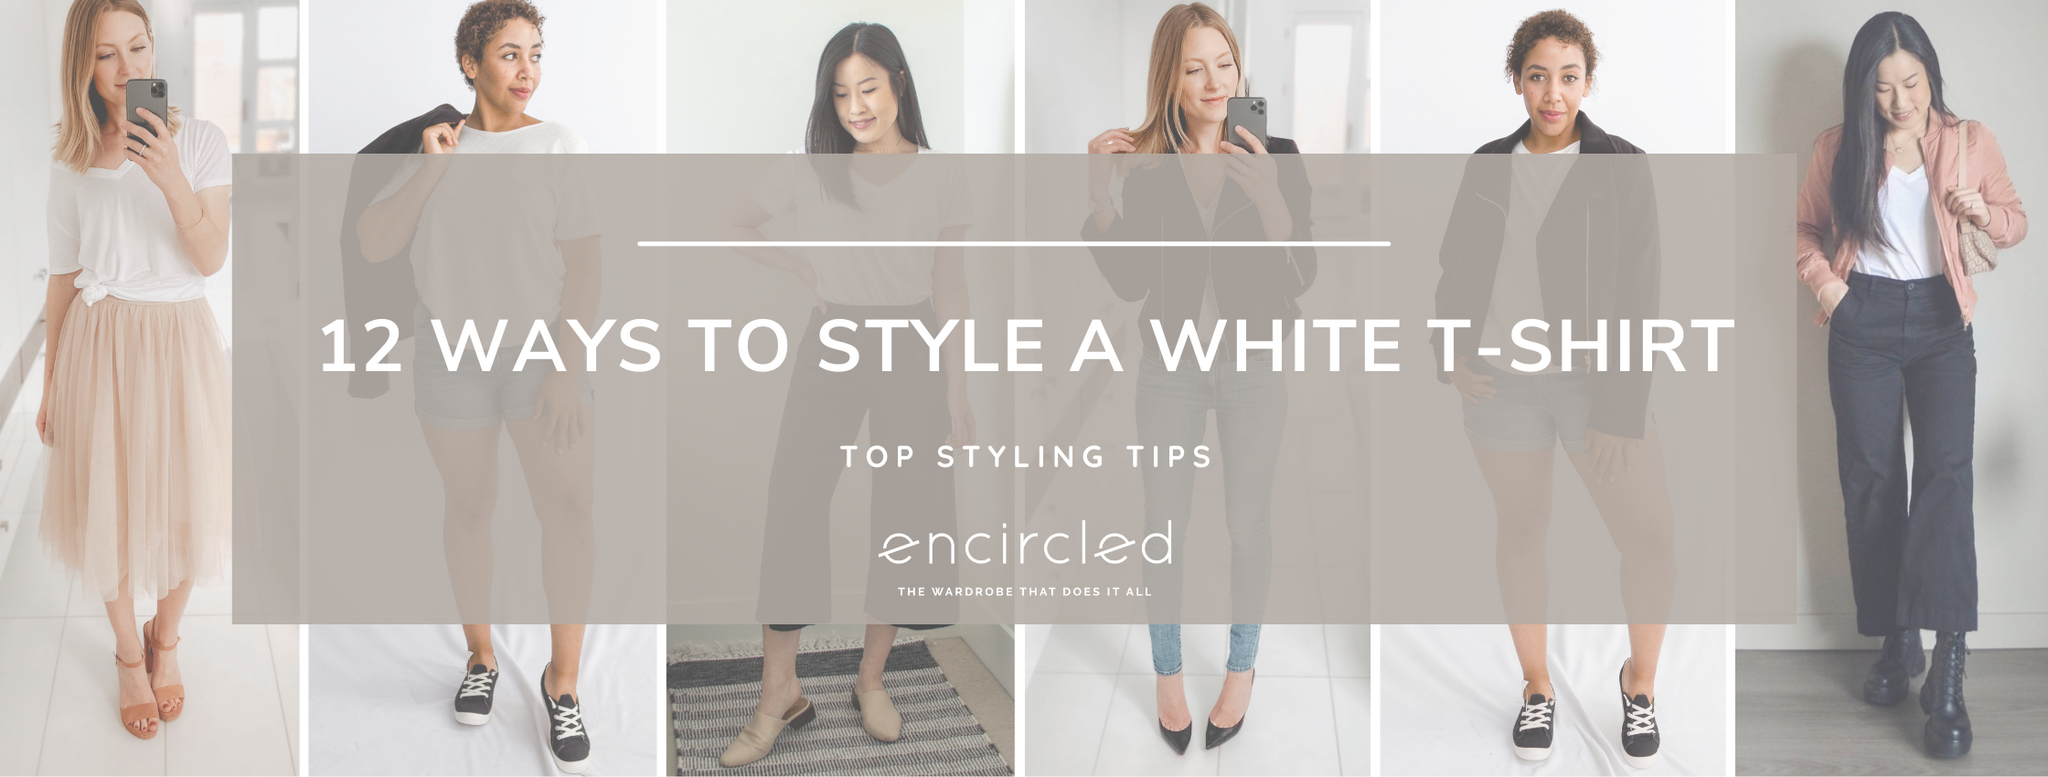 12 Ways to Style a White T-Shirt